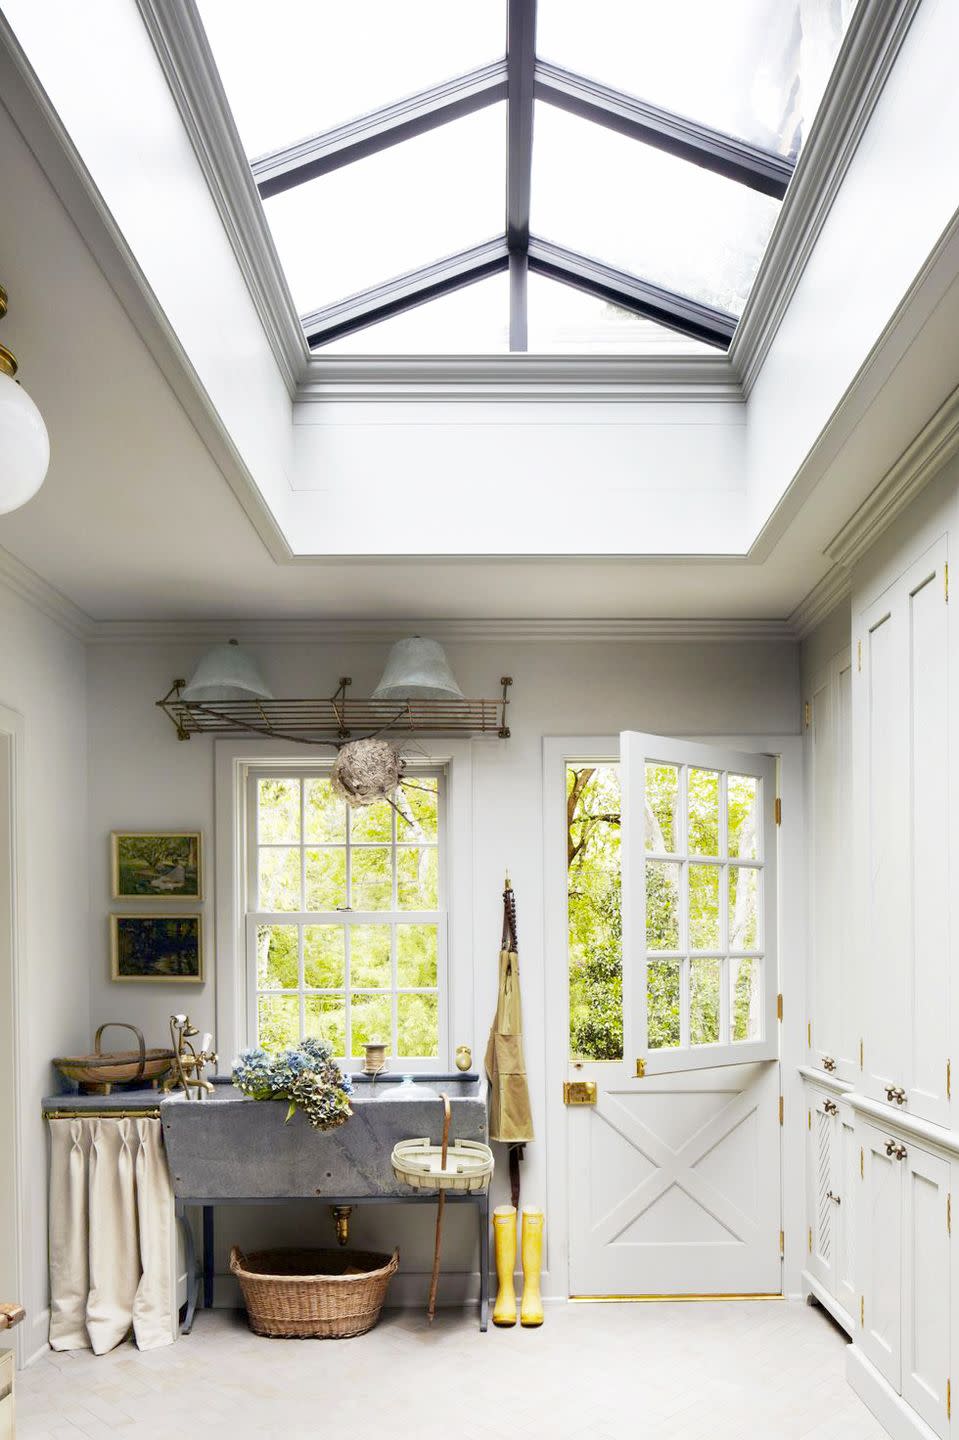 1) Pitched Skylights